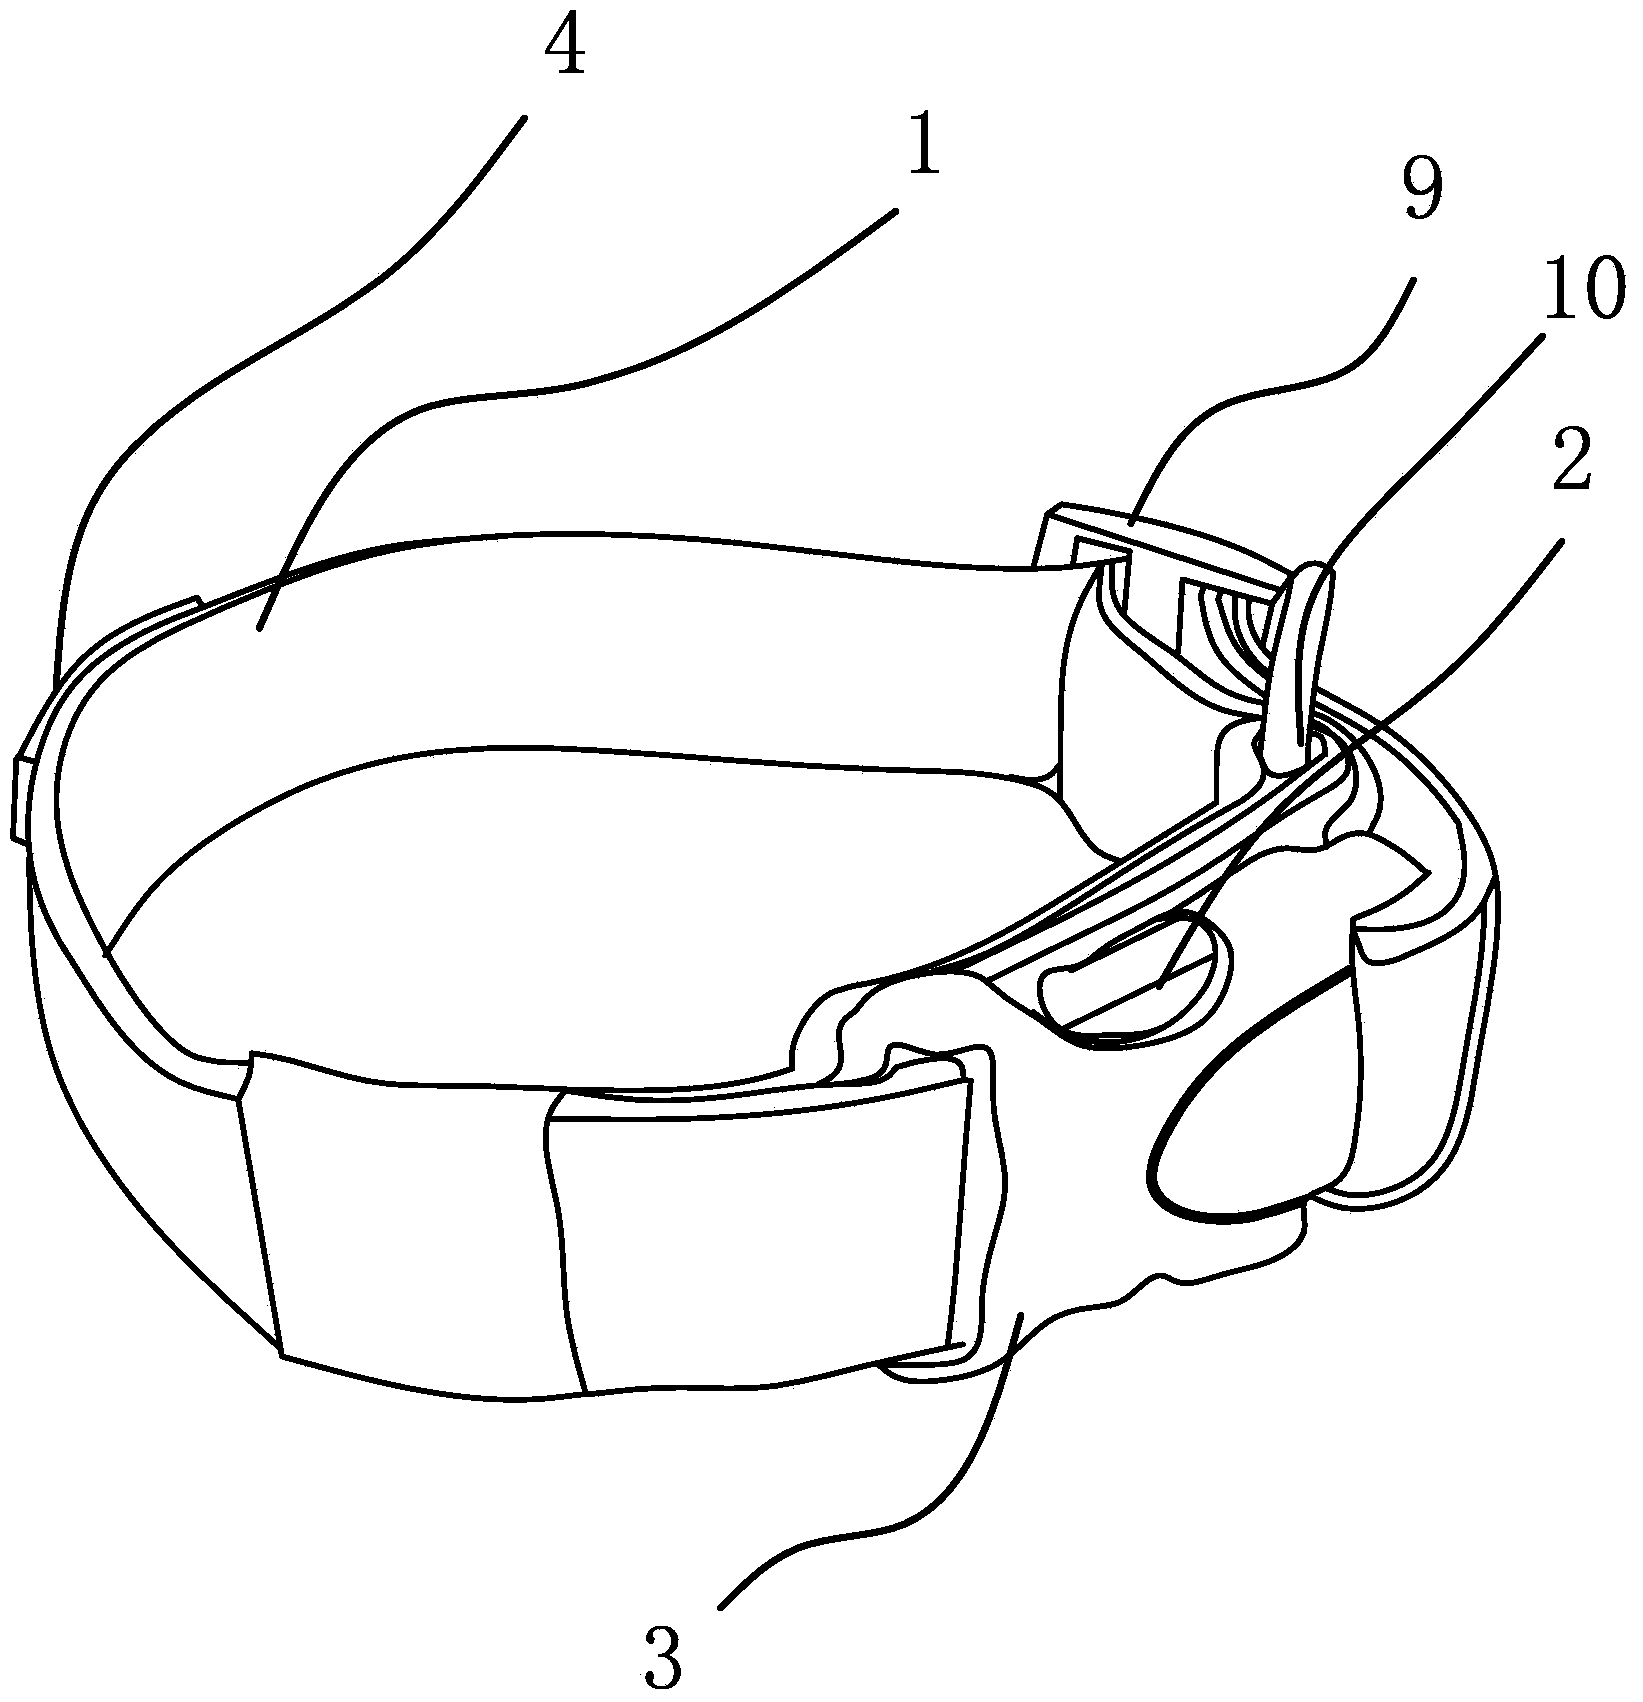 Pet collar provided with positioning device